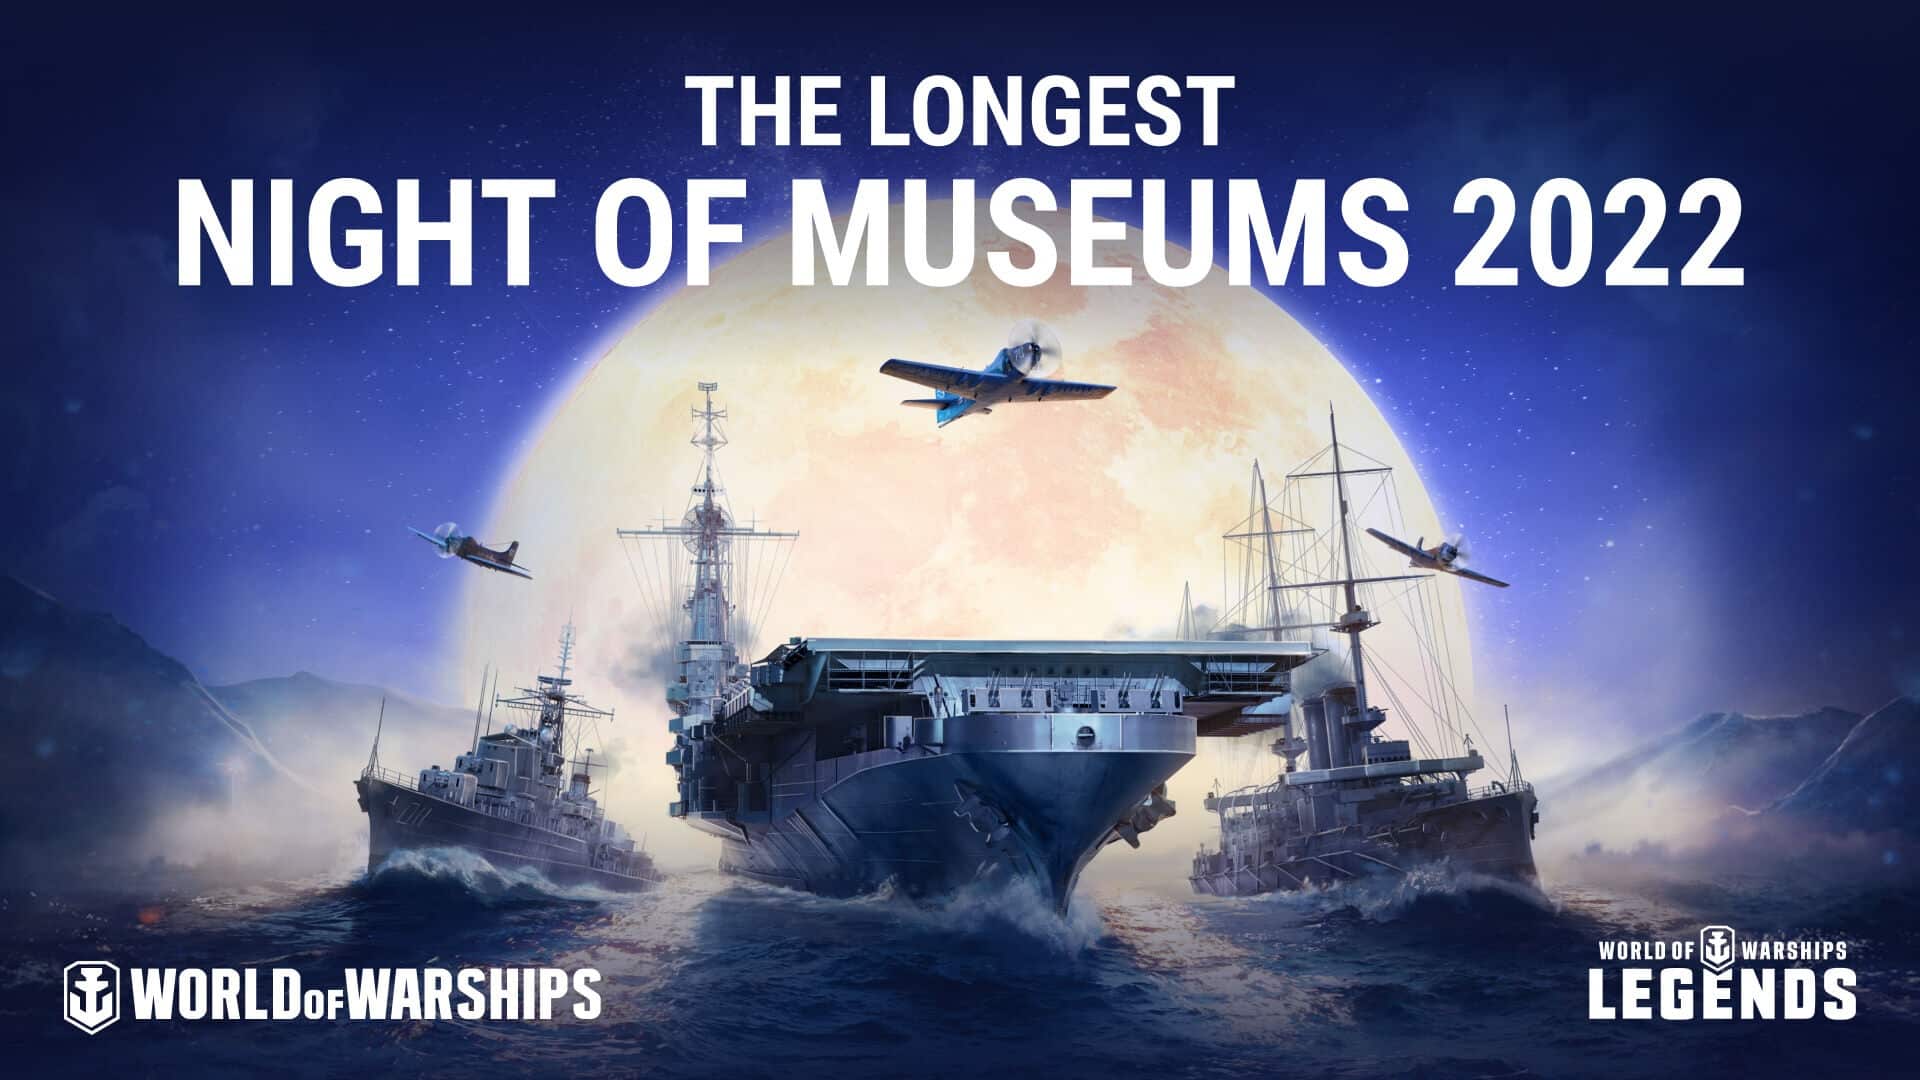 World of warships anuncia longest night of museums 2022 em apoio a caridade | 1cac8bbf warships | android, ios, mobile, multiplayer, pc, playstation 4, wargaming, world of warships, xbox one | world of warcraft dragonflight notícias